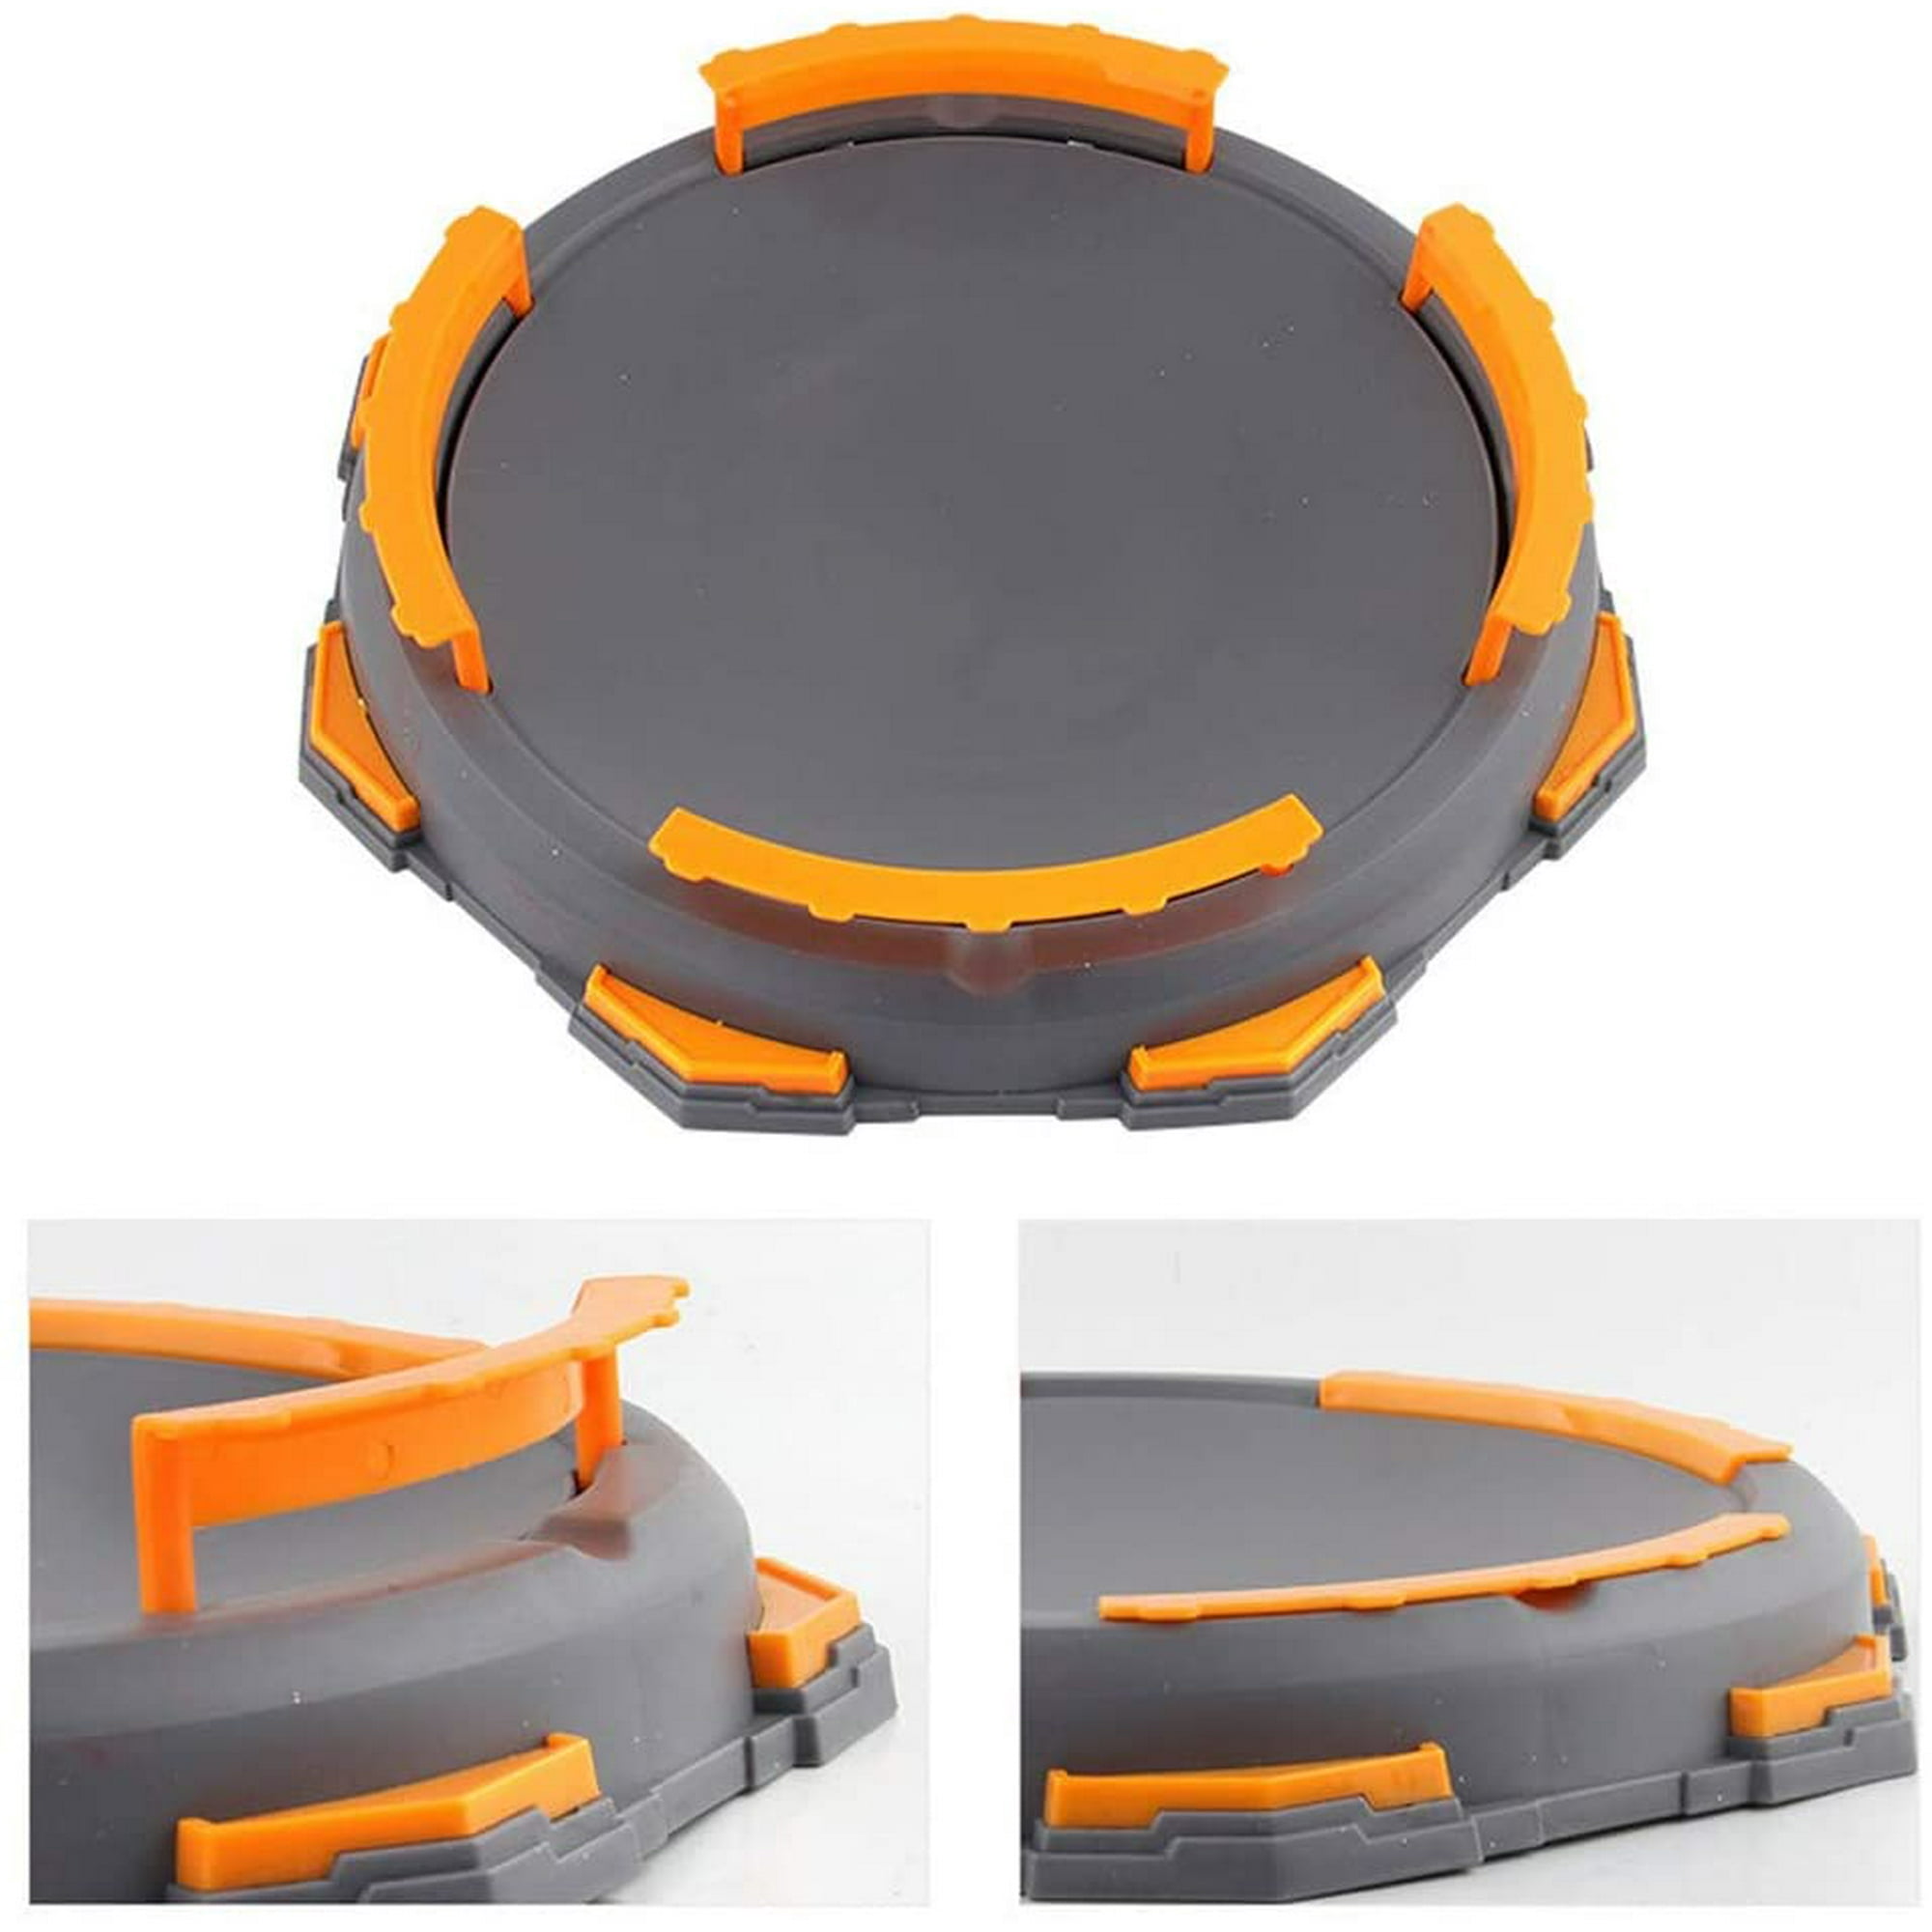 Arena Disk For Beyblade Burst Gyro Exciting Duel Gyro Stadium Battle Plate  Toy Accessories Boys Gift Kids Toy Beyblade Arena | Walmart Canada